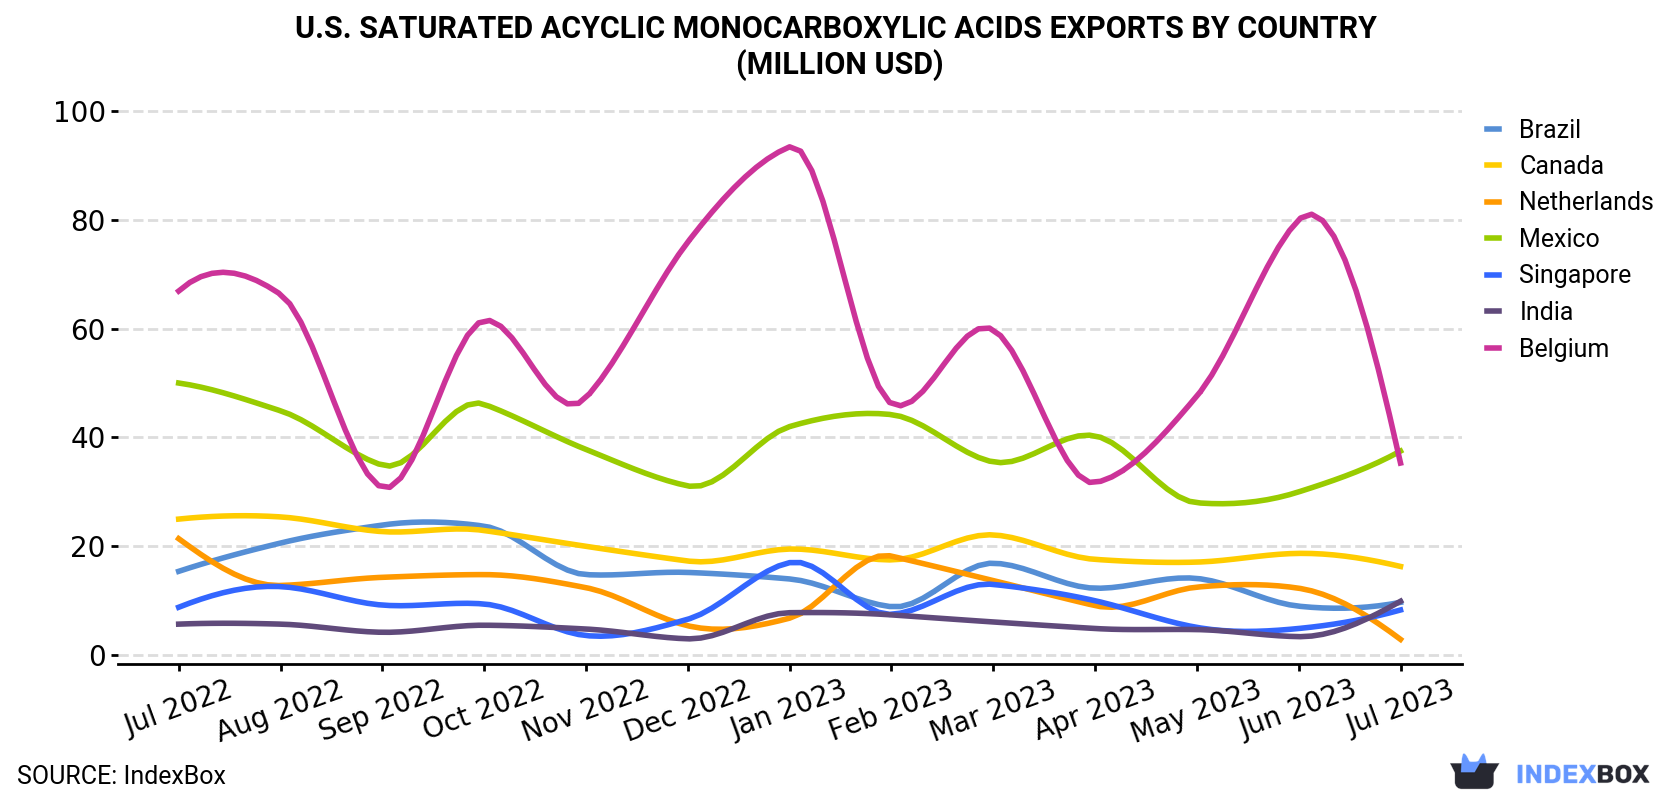 U.S. Saturated Acyclic Monocarboxylic Acids Exports By Country (Million USD)